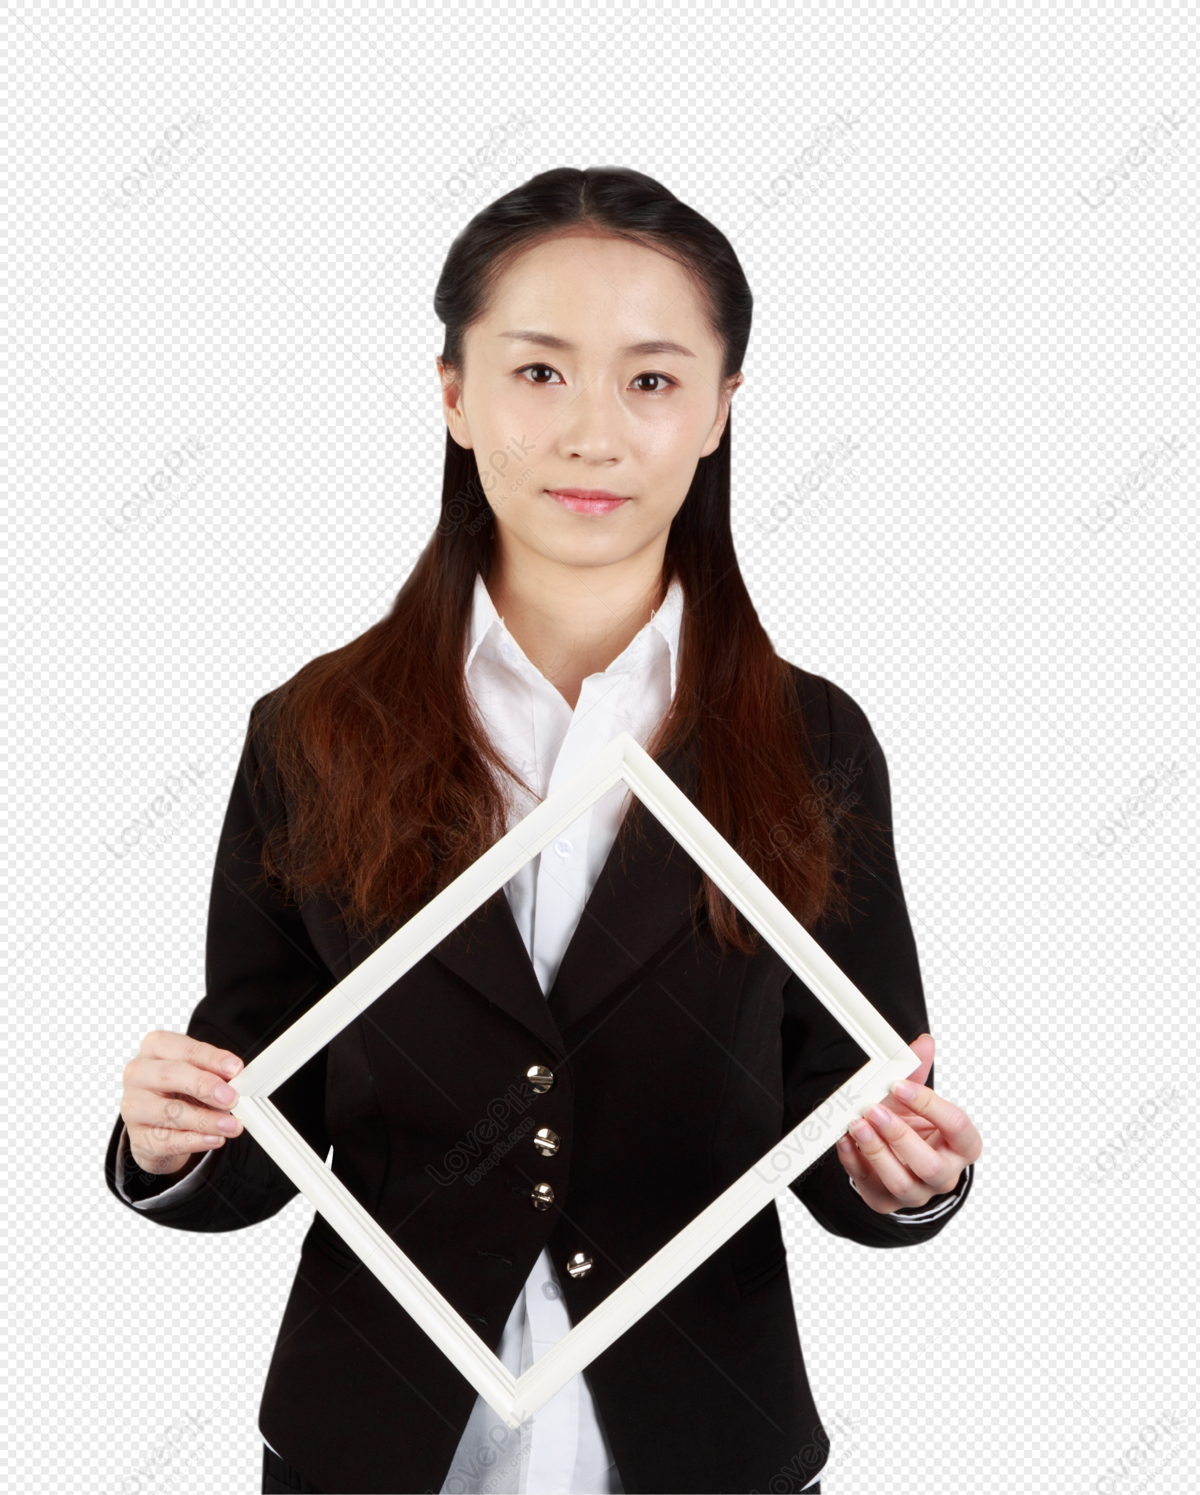 Business Career Ladies PNG Hd Transparent Image And Clipart Image For ...